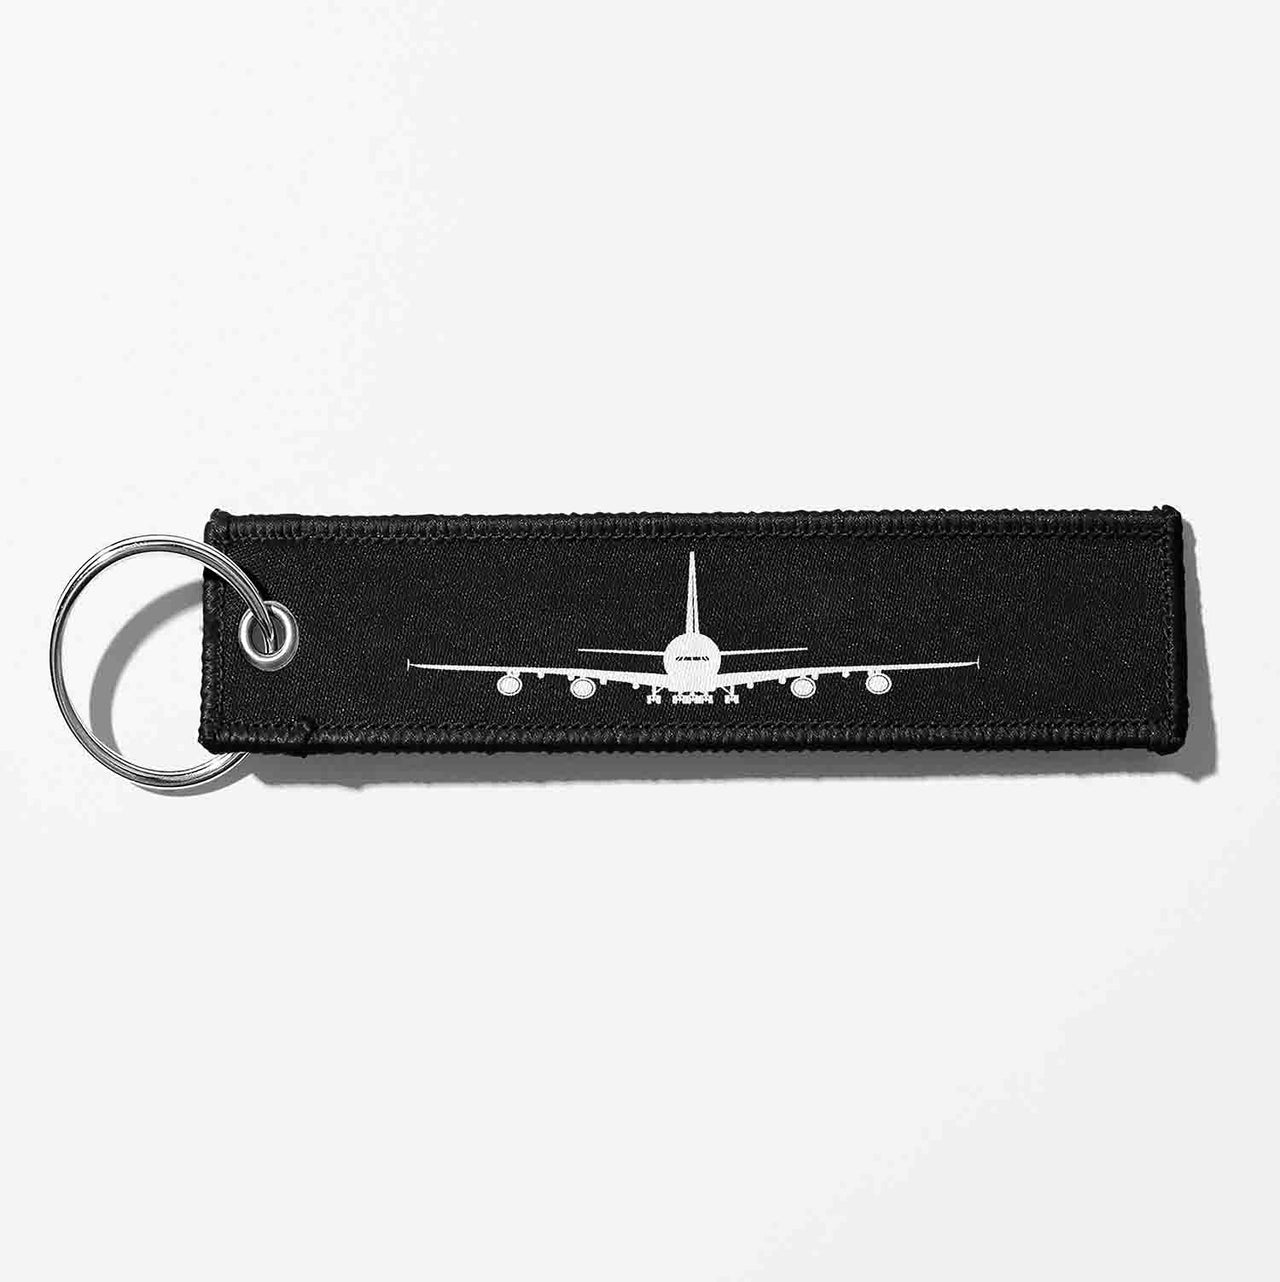 Airbus A380 Silhouette Designed Key Chains